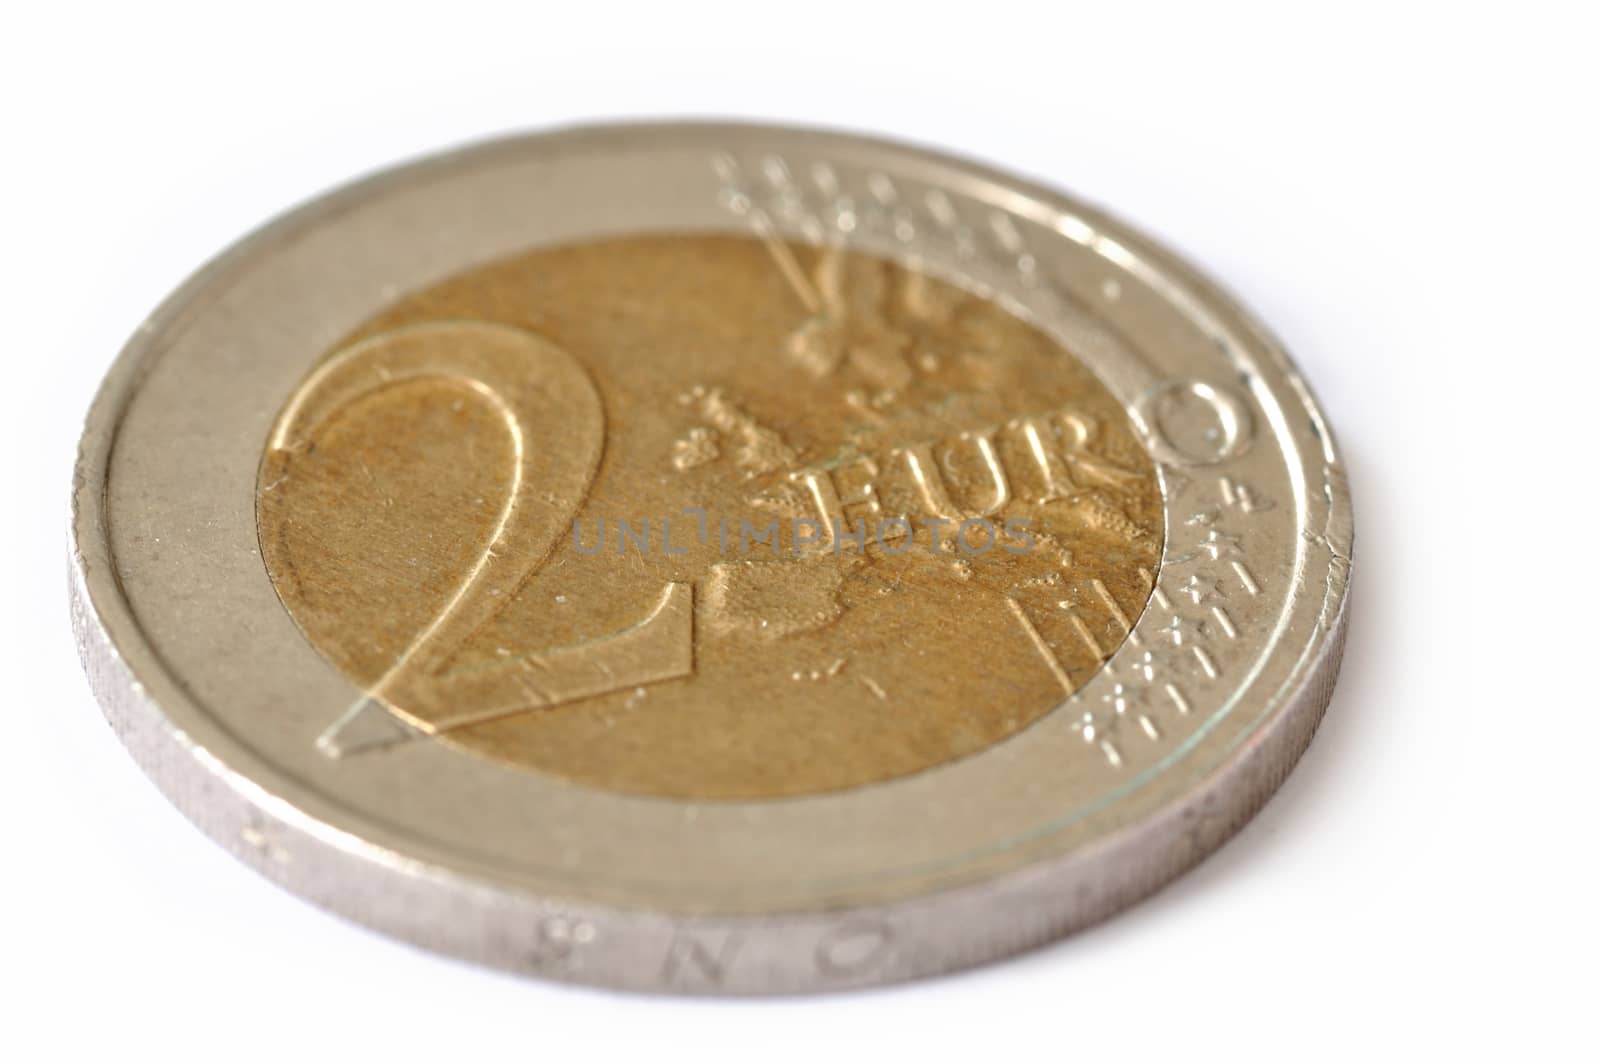 two euros by NeydtStock